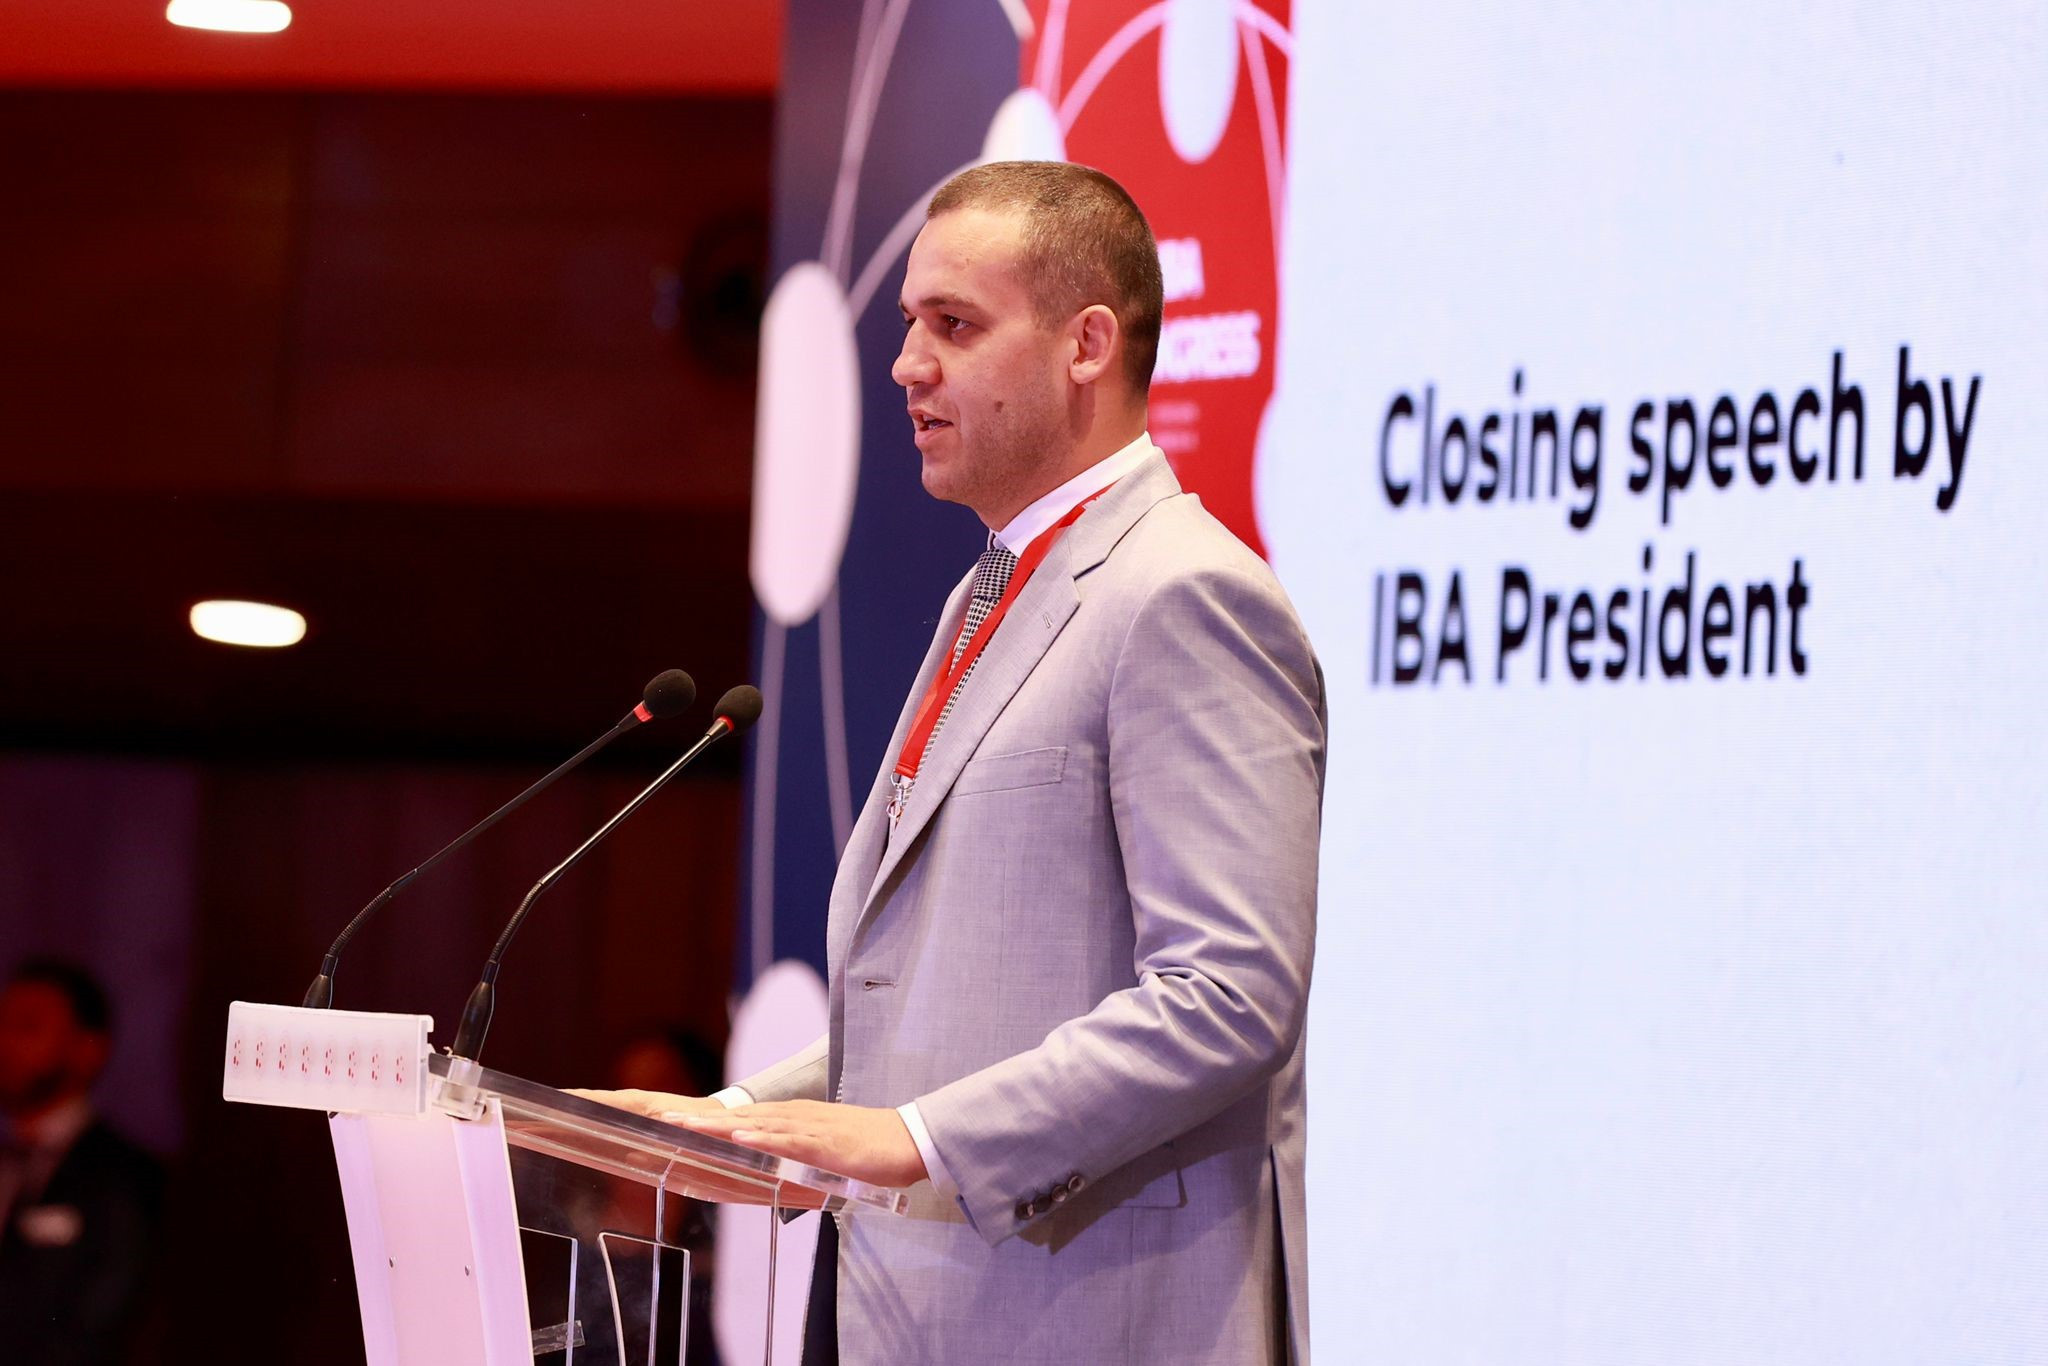 IBA President Umar Kremlev insisted that his top priority would be to 